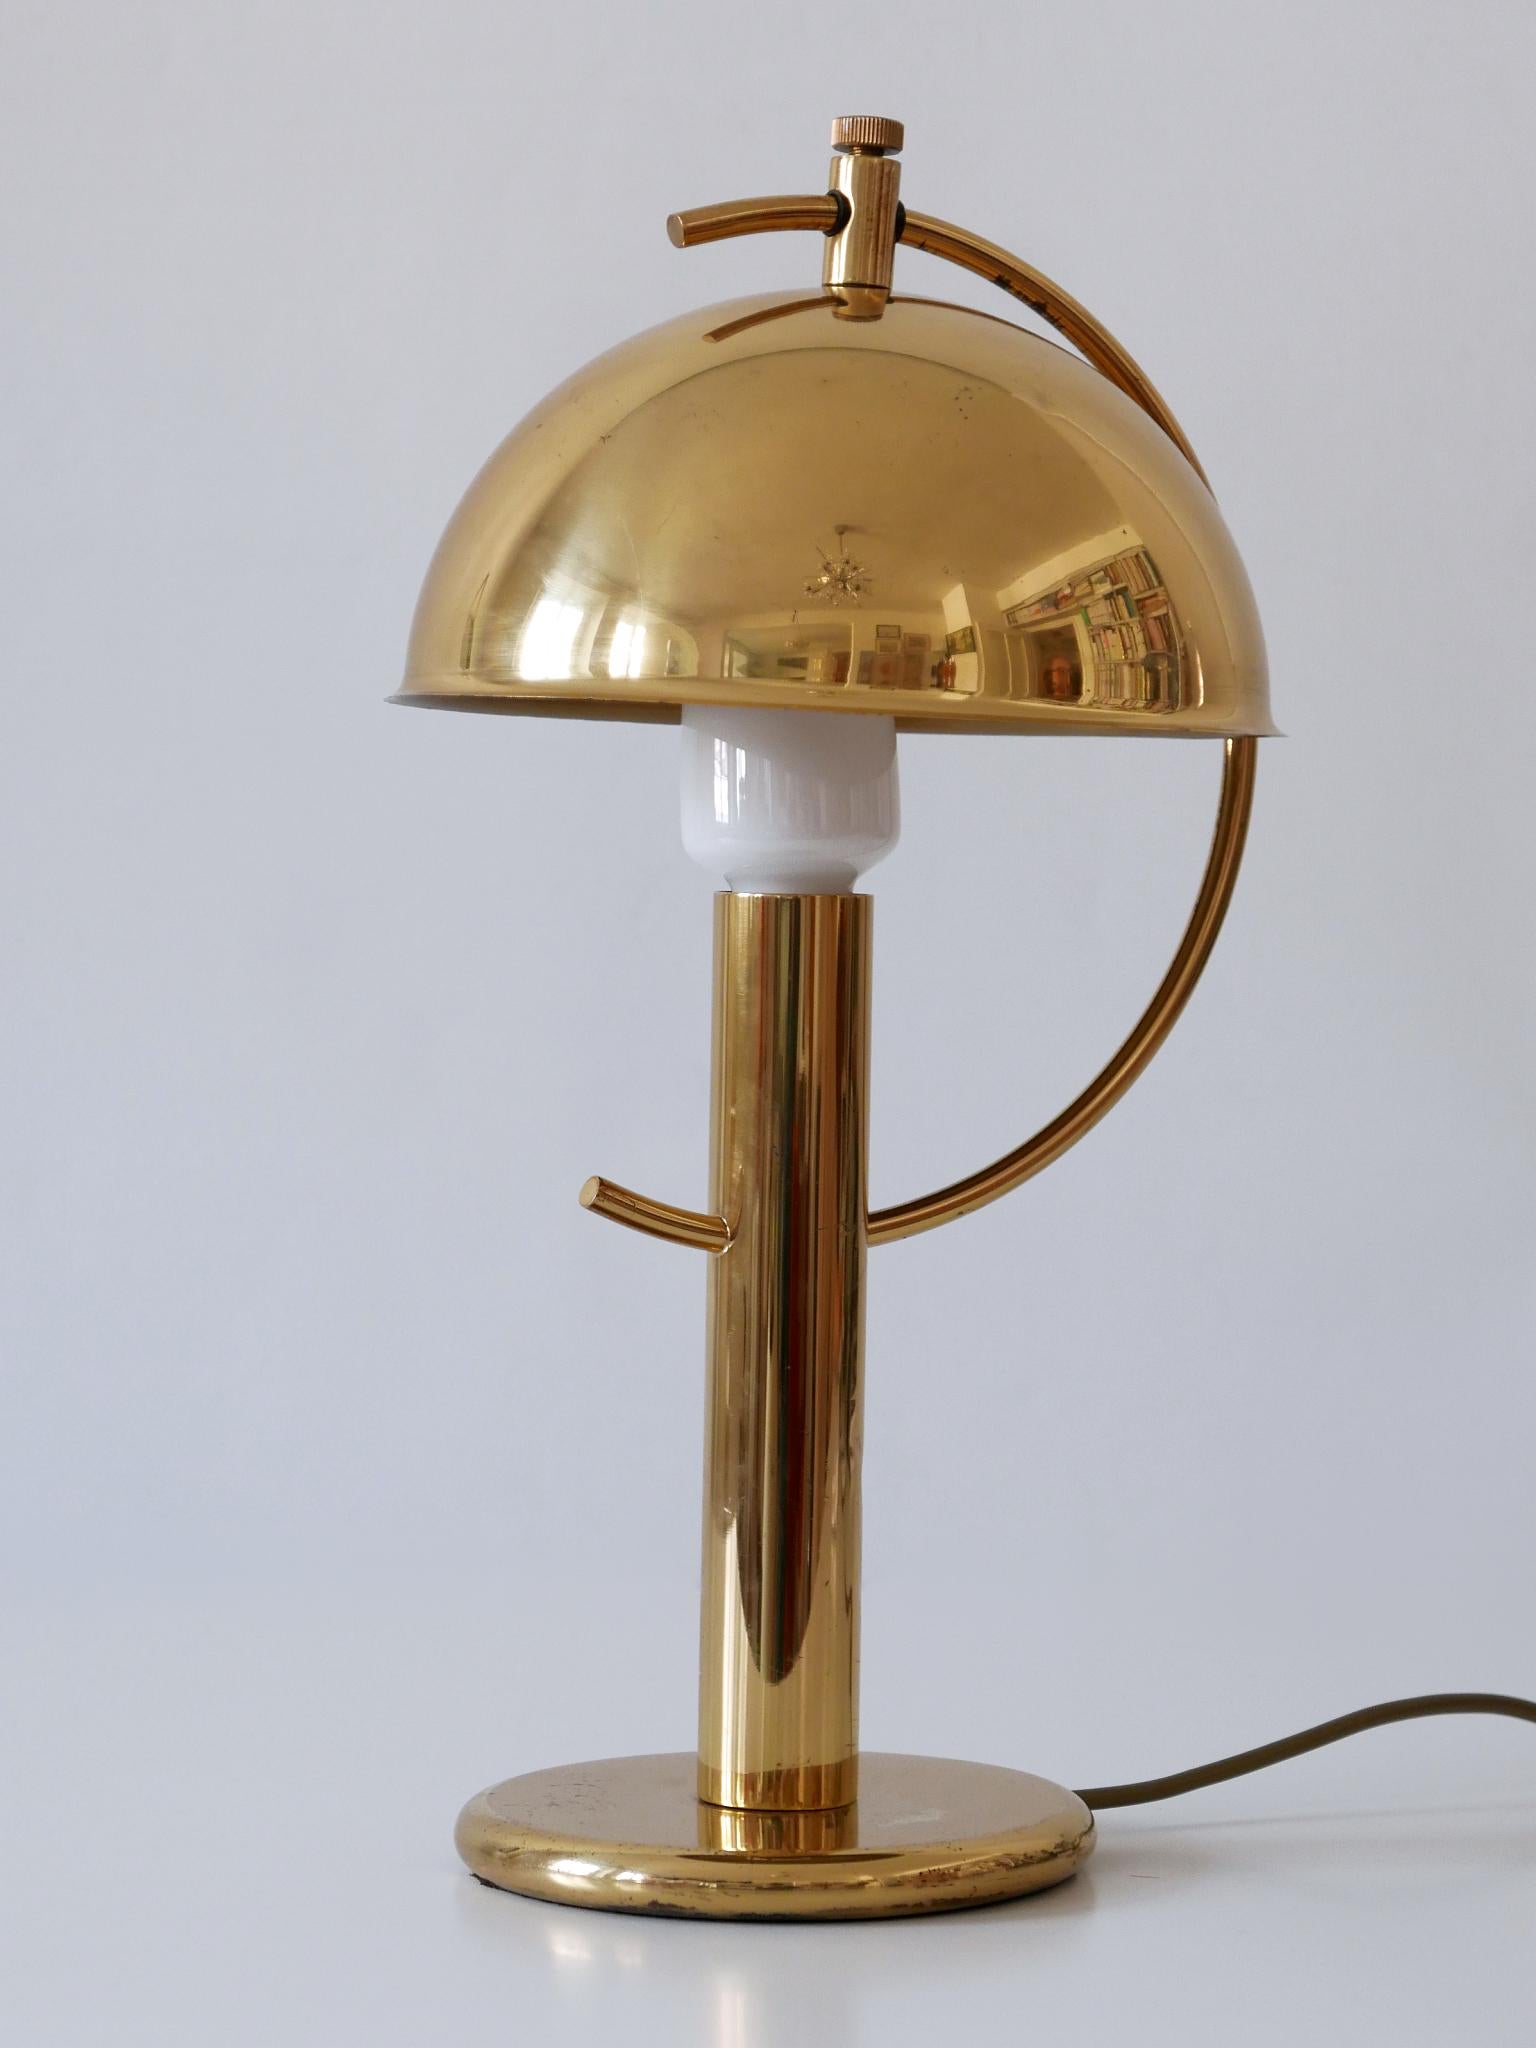 Exceptional Mid-Century Modern Brass Table Lamp by Gebrüder Cosack Germany 1960s For Sale 1